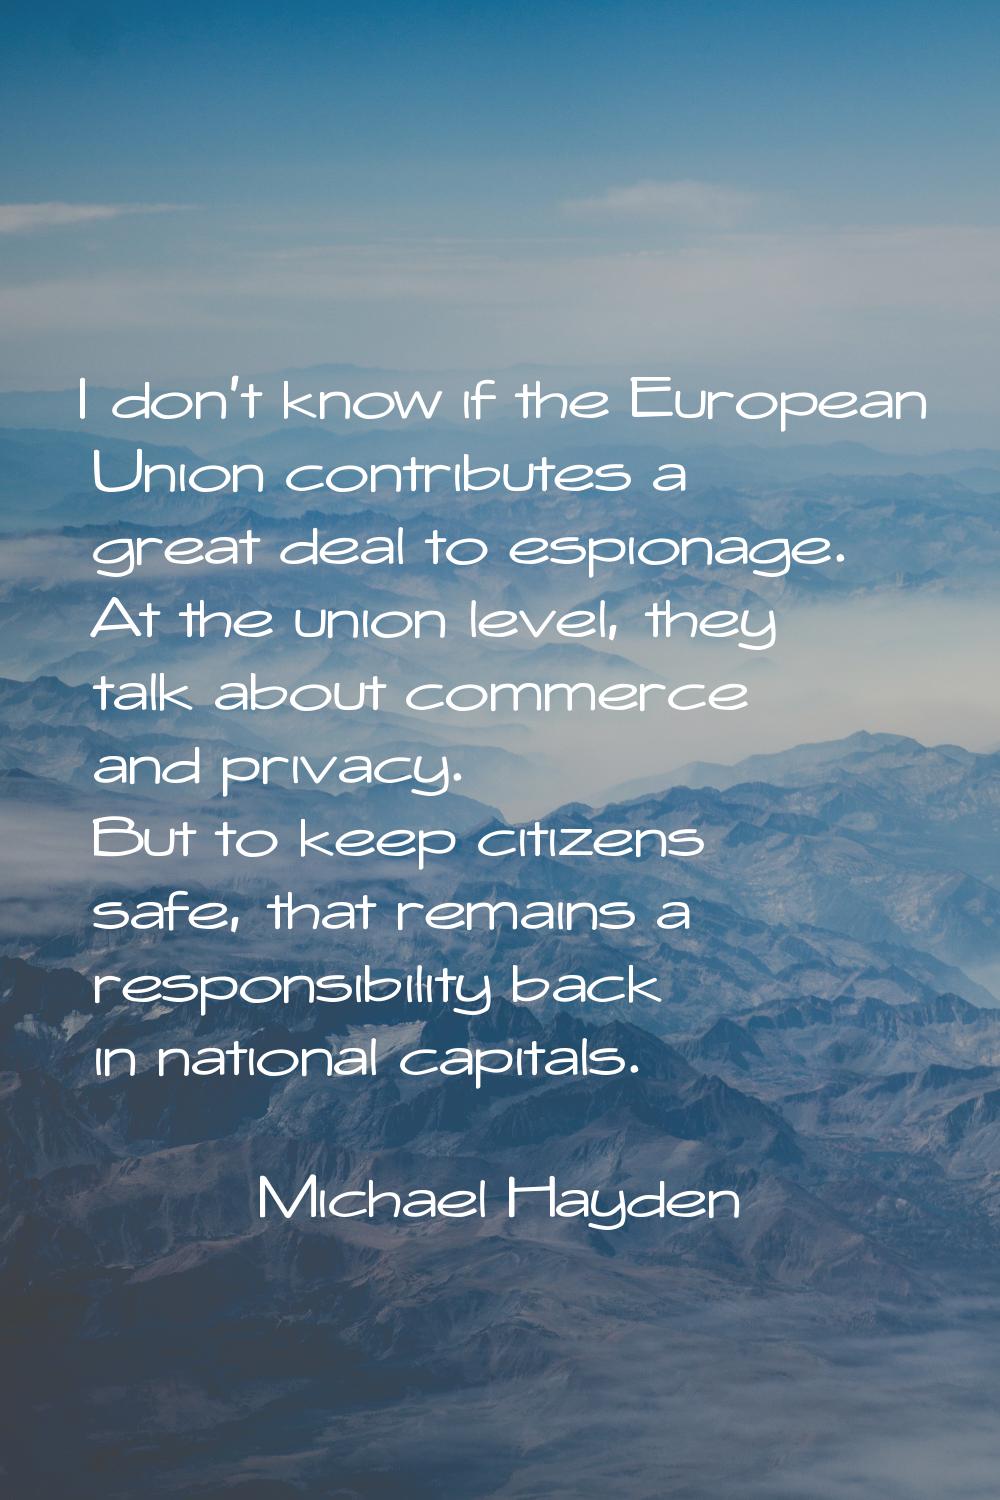 I don't know if the European Union contributes a great deal to espionage. At the union level, they 